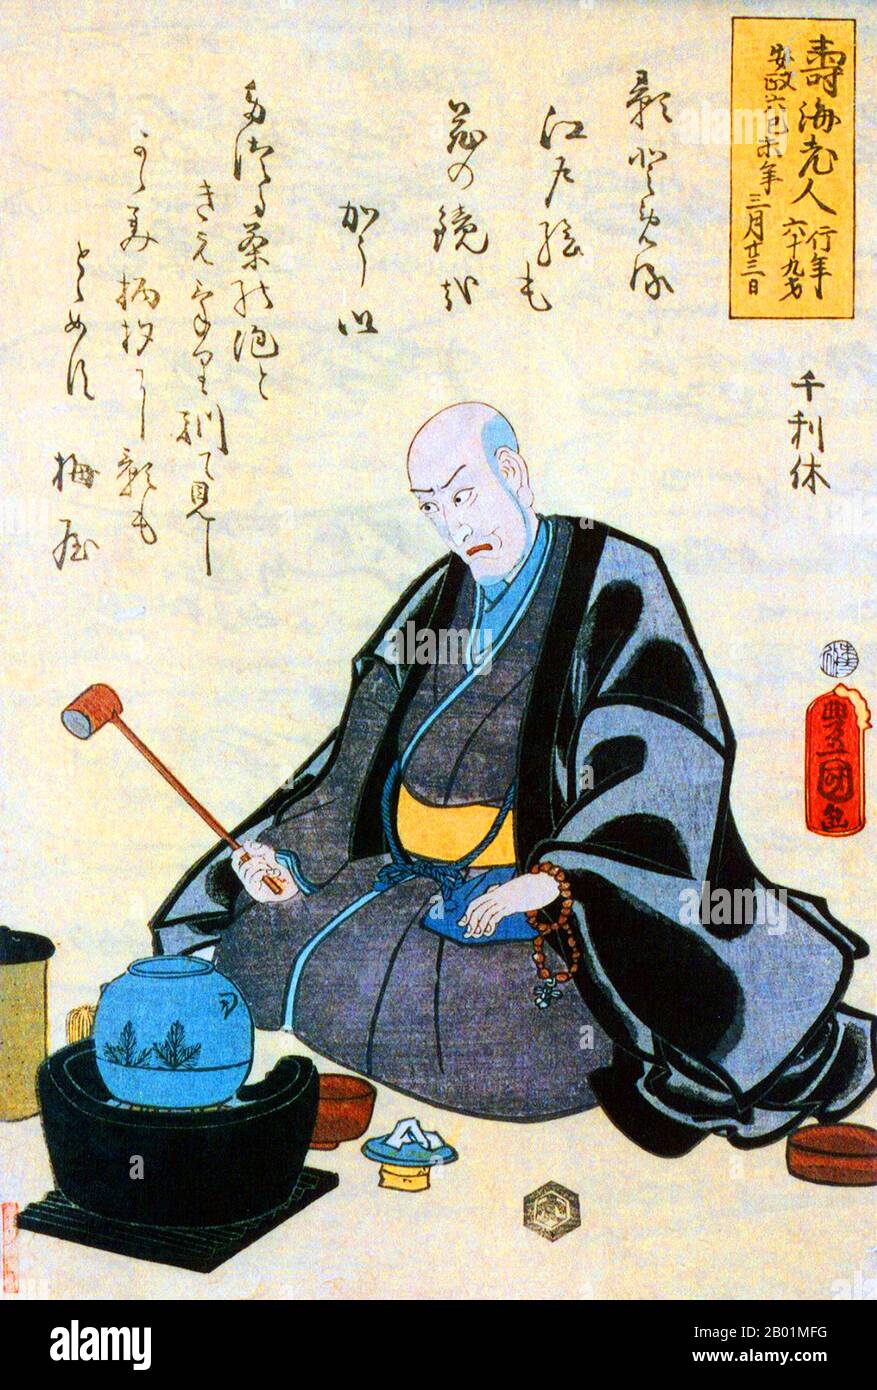 Japan: Ukiyo-e woodblock print of Sen no Rikyu (1522 - 21 April 1591), Japanese Tea Master, 1859.  Sen no Rikyū, also known simply as Sen Rikyū, is considered the historical figure with the most profound influence on chanoyu, the Japanese 'Way of Tea', particularly the tradition of wabi-cha.  He was also the first to emphasise several key aspects of the ceremony, including rustic simplicity, directness of approach and honesty of self. Originating from the Edo Period and the Muromachi Period, these aspects of the tea ceremony persist today. Stock Photo